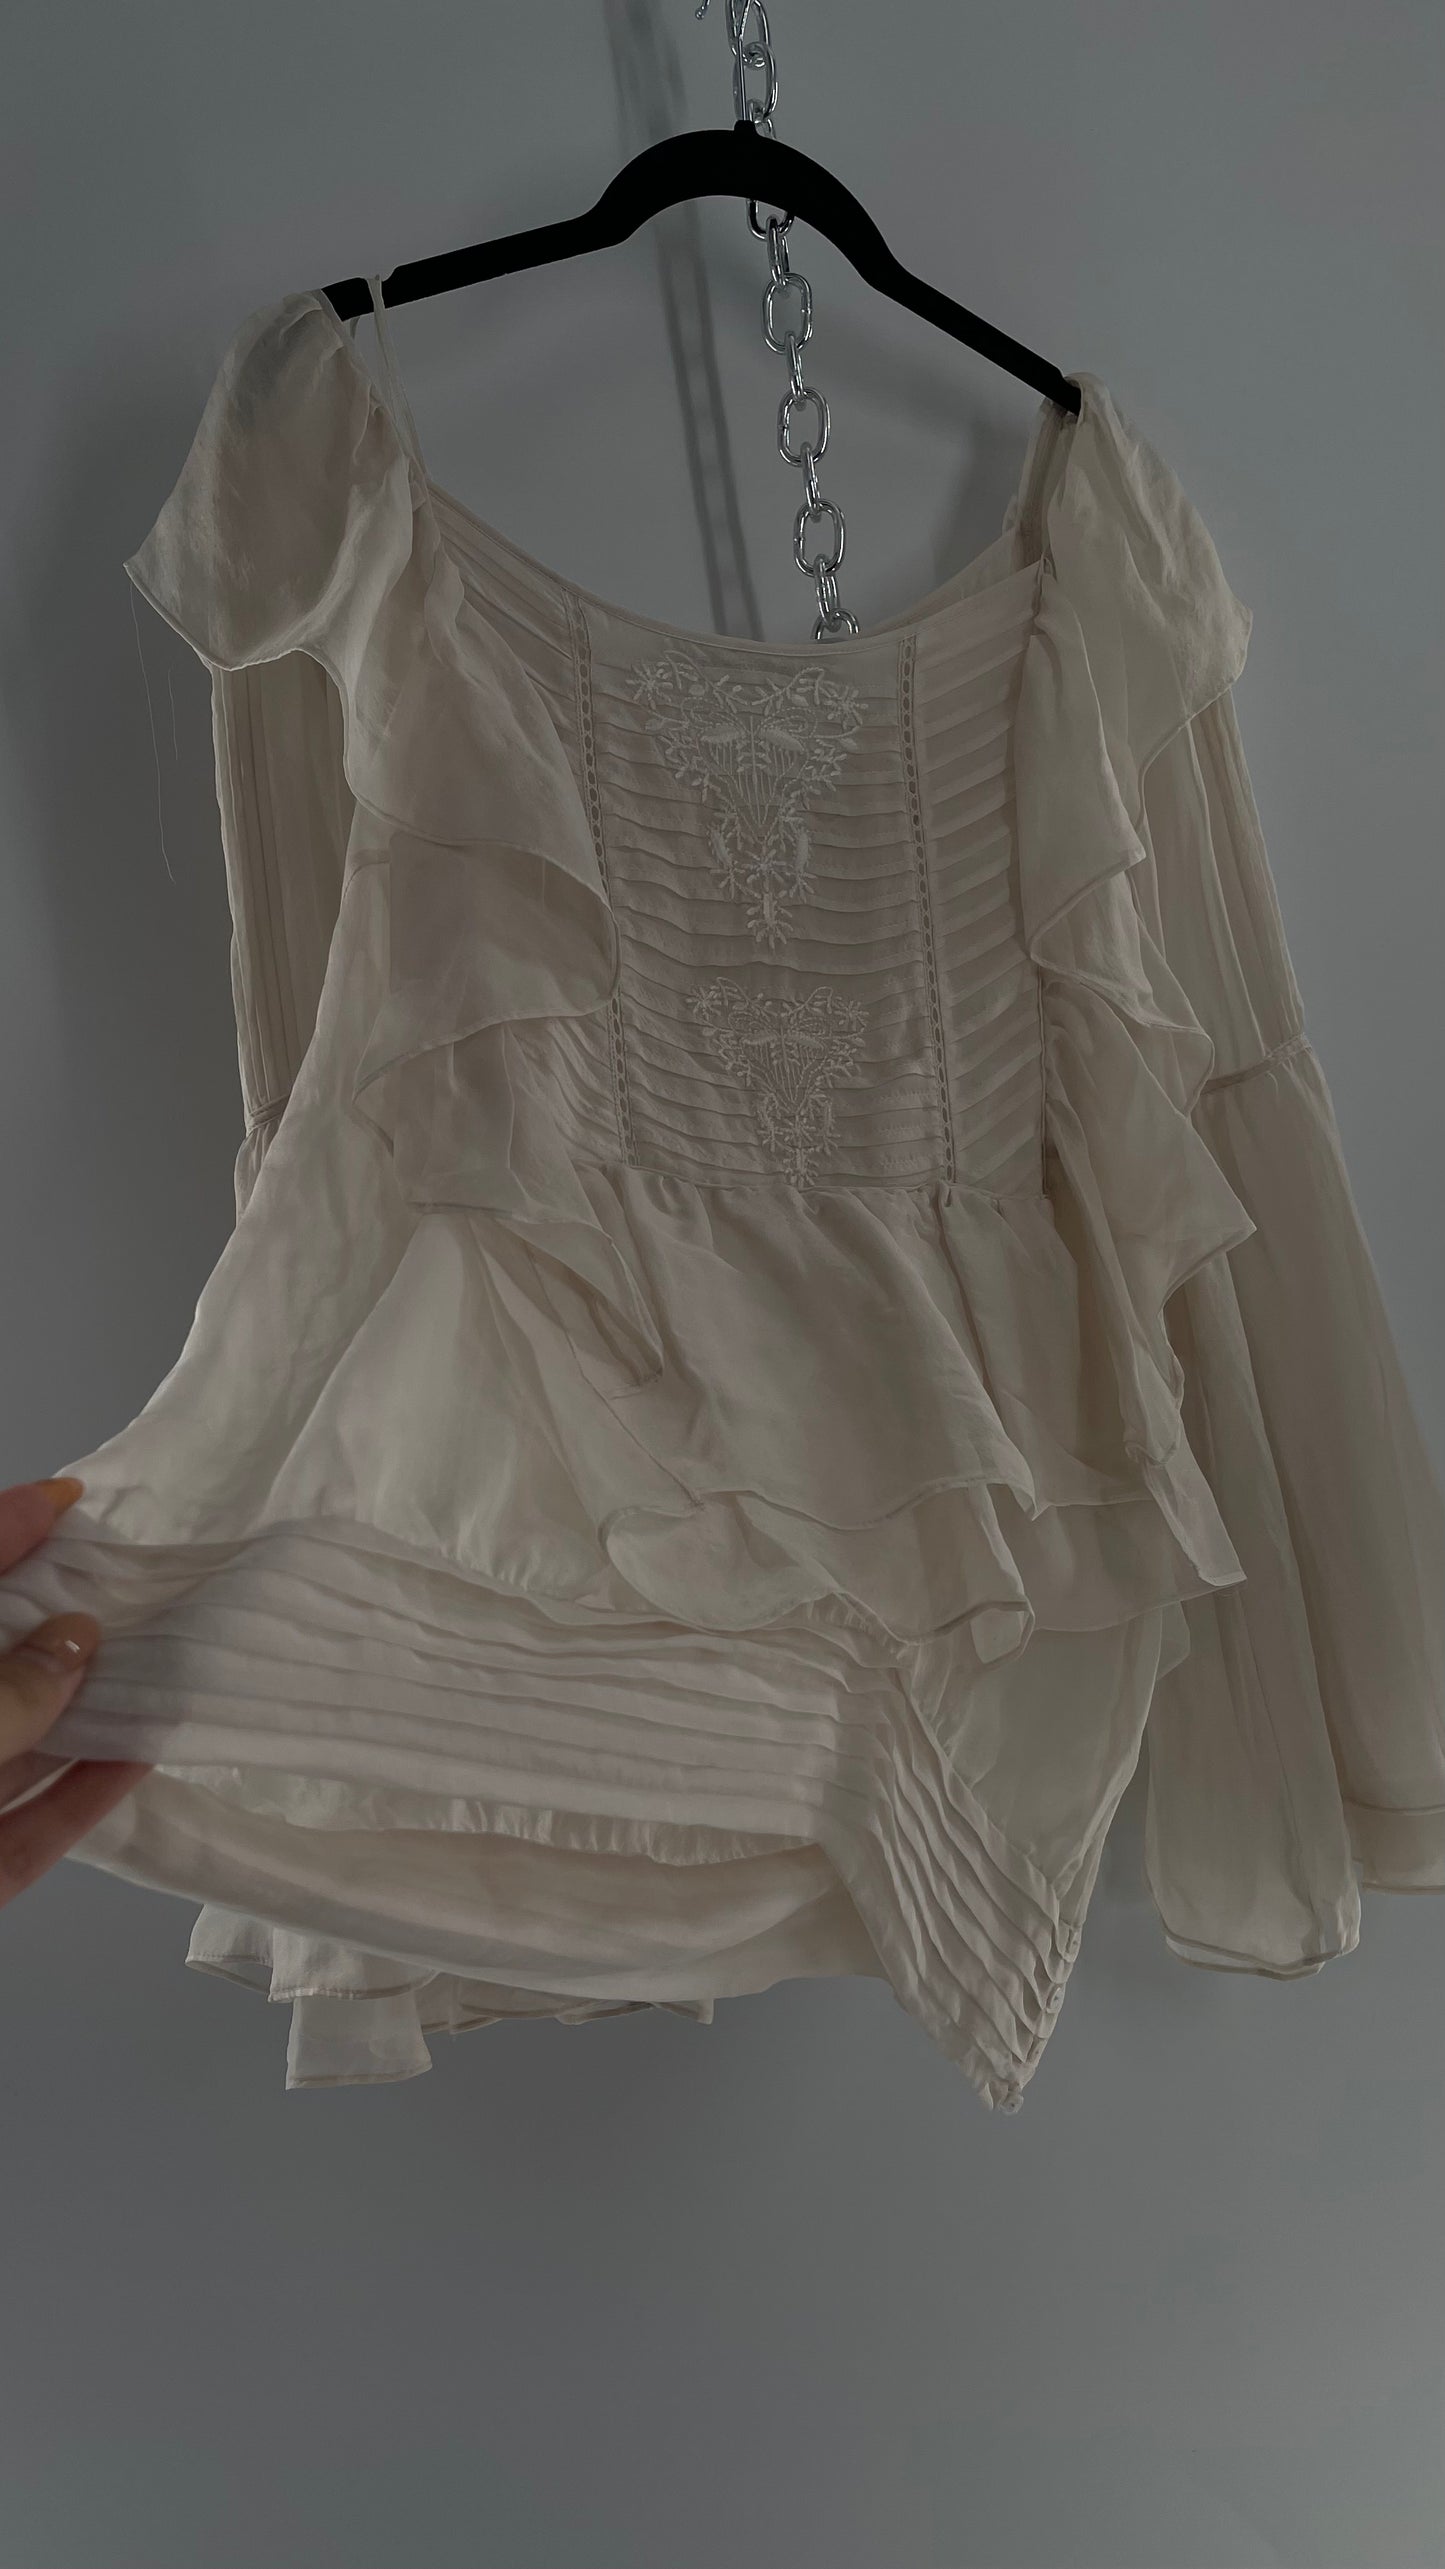 ZARA Ruffled and Embroidered Bell Sleeve Blouse (Large)